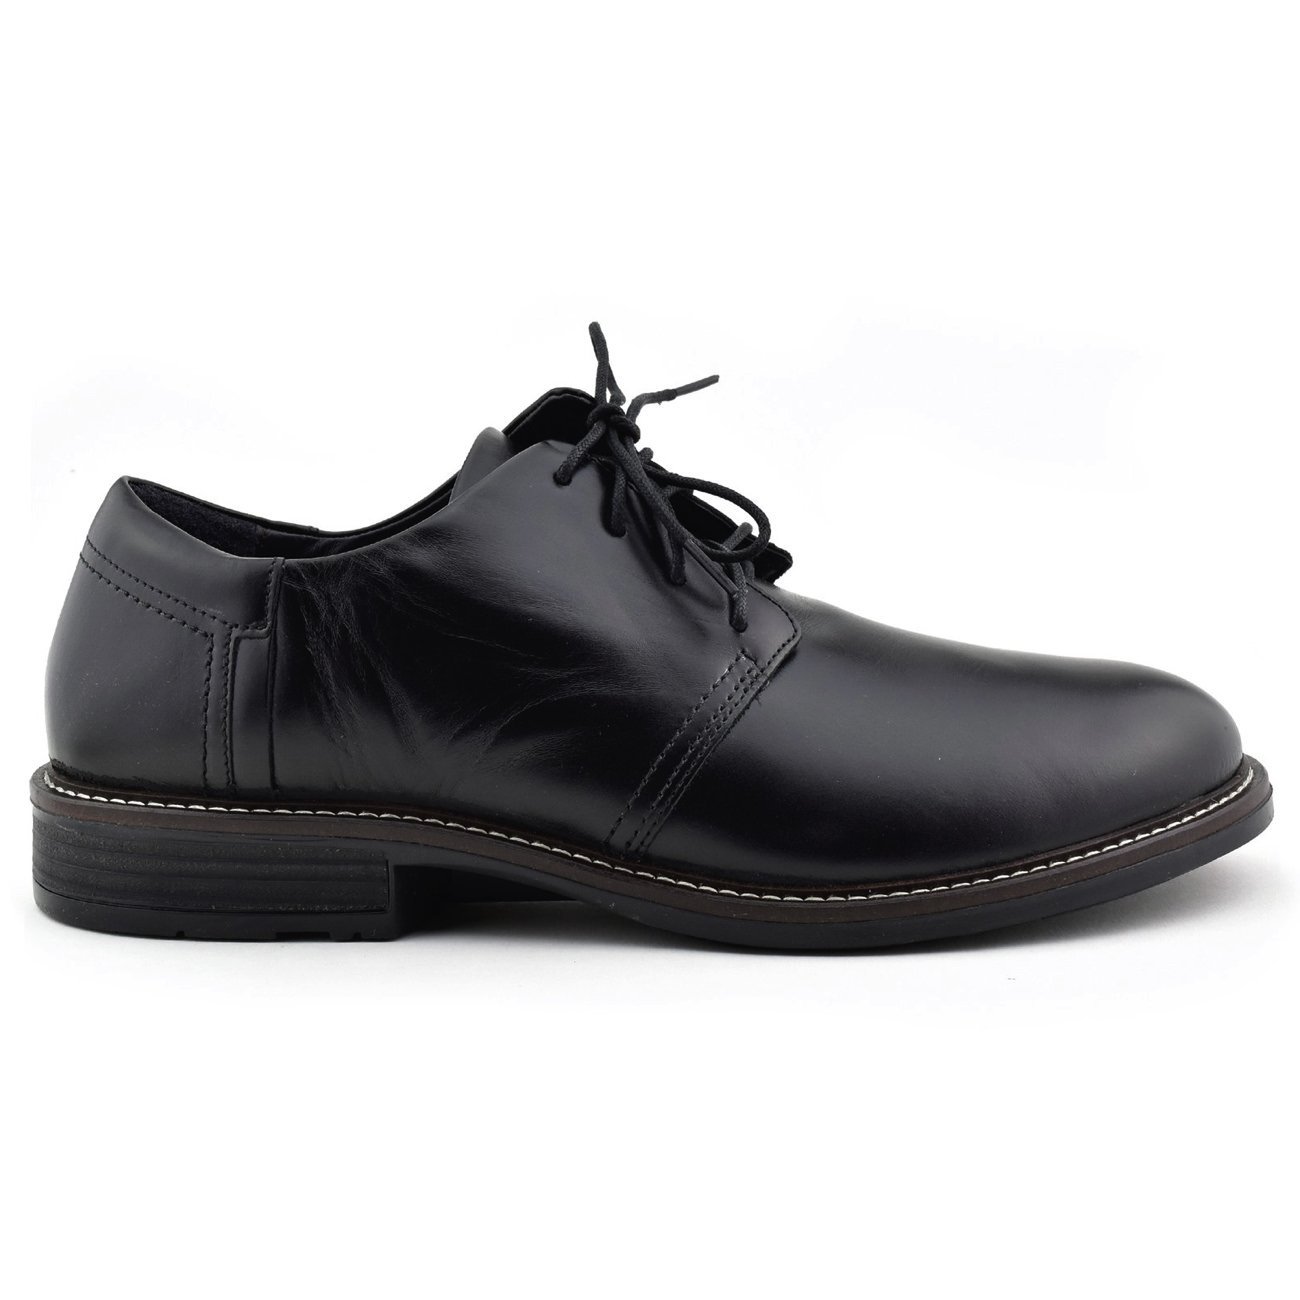 NAOT, Chief, Leather, Removable Innersole, Black Madras Shoes Naot Black Madras 41 